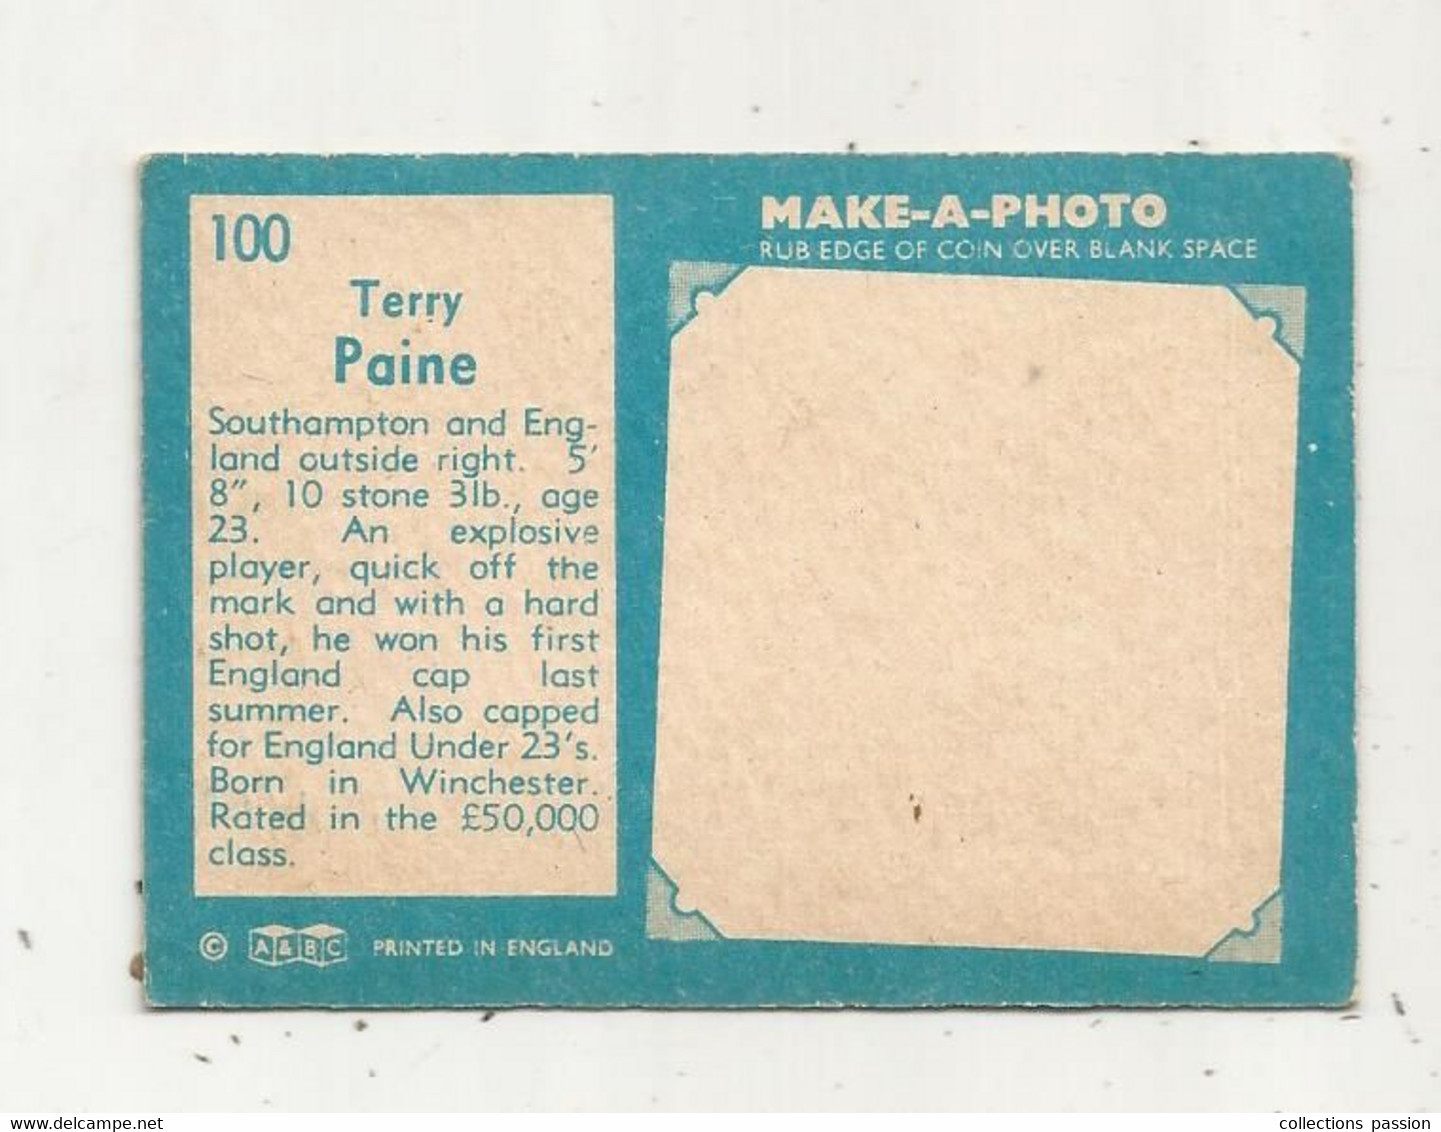 Trading Card , A&BC , England, Chewing Gum, Serie: Make A Photo , Année 60 , N° 100, TERRY PAINE, Southampton - Trading Cards